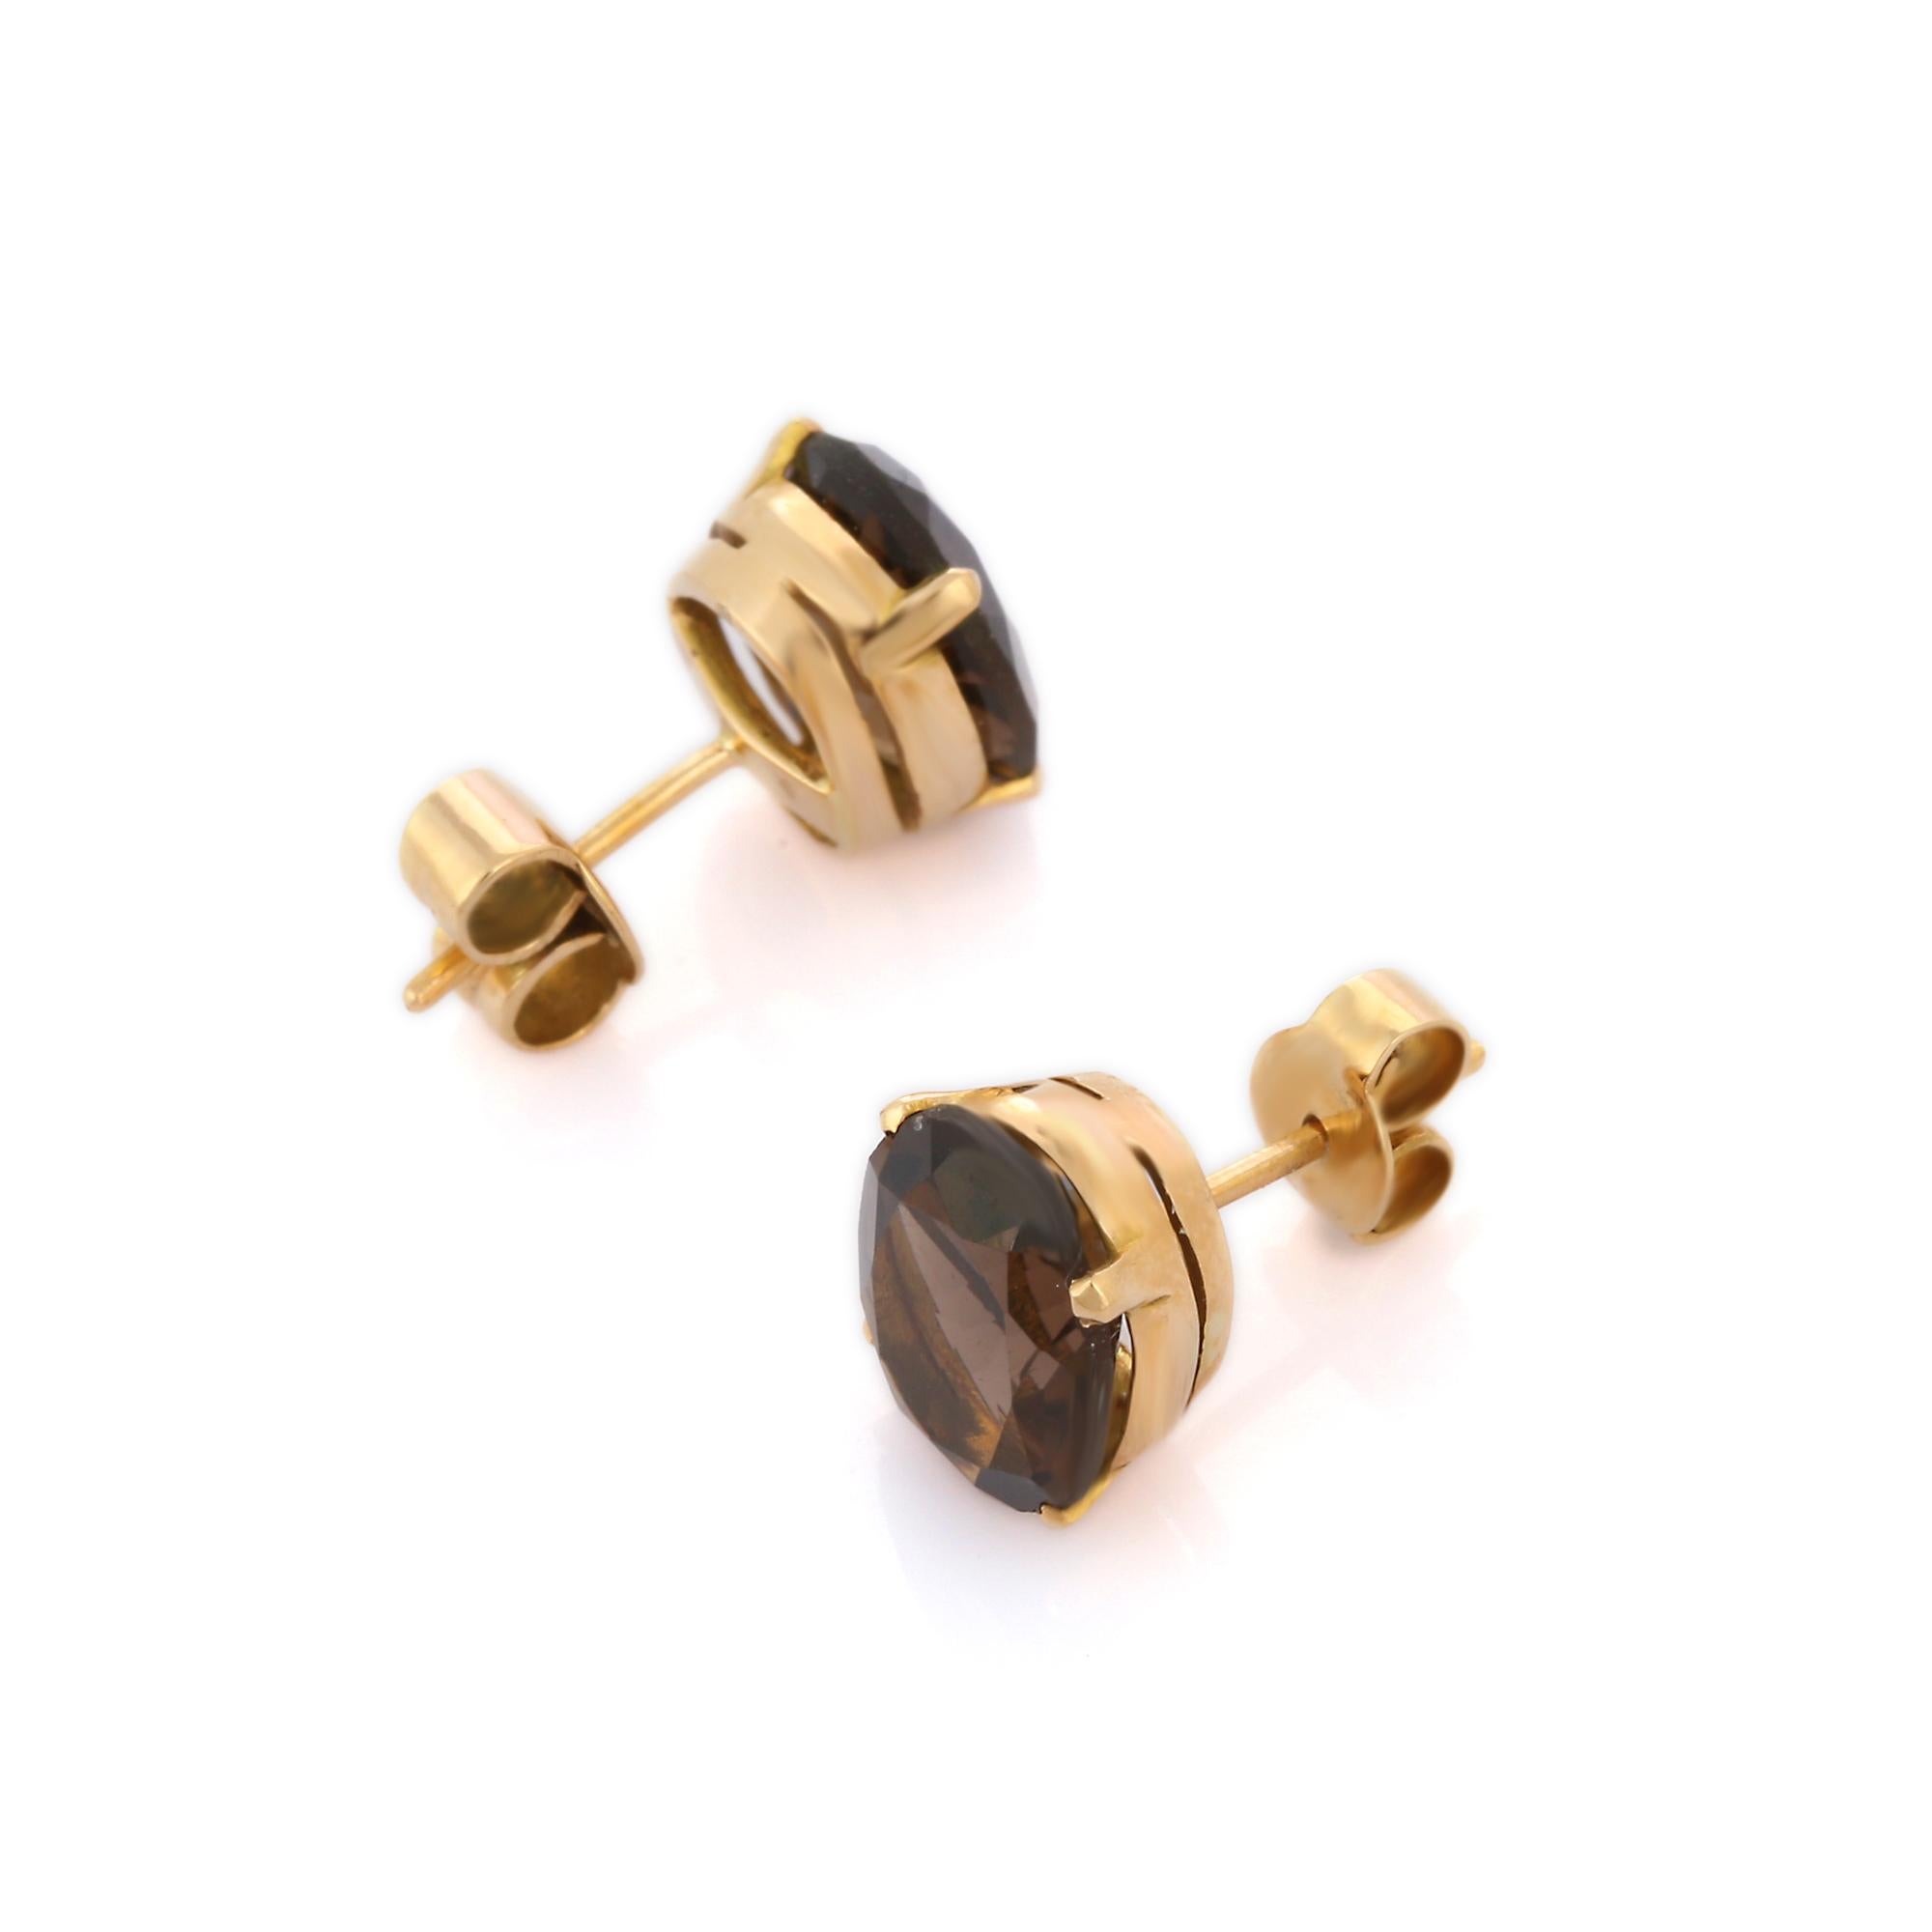 Studs create a subtle beauty while showcasing the colors of the natural precious gemstones and illuminating diamonds making a statement.

Oval cut smoky quartz studs in 18K gold. Embrace your look with these stunning pair of earrings suitable for